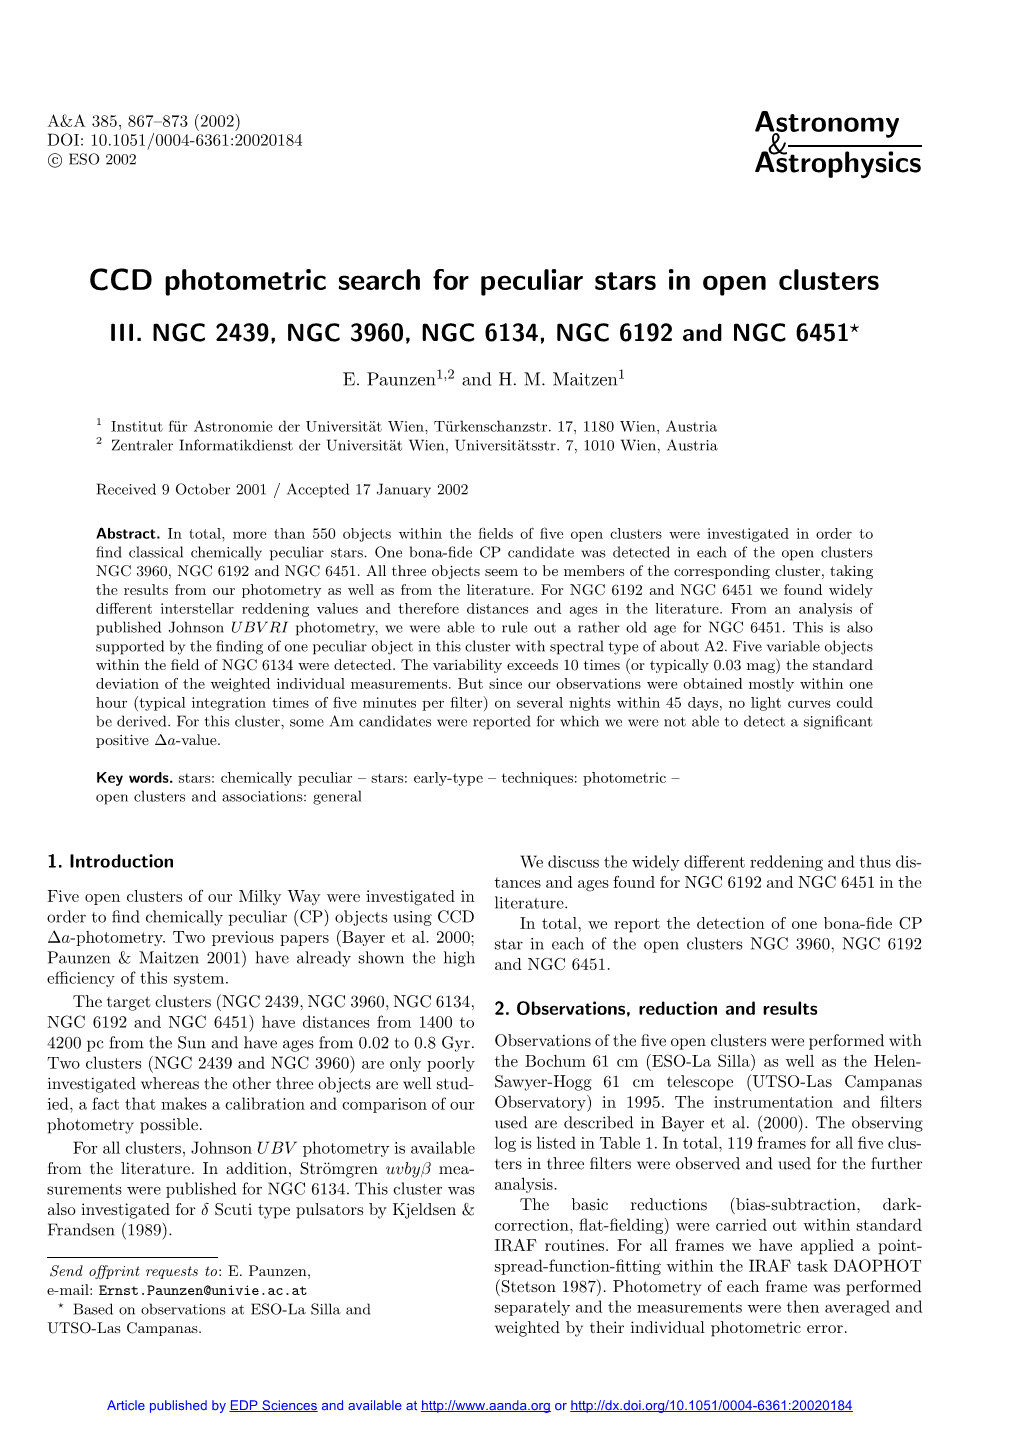 CCD Photometric Search for Peculiar Stars in Open Clusters